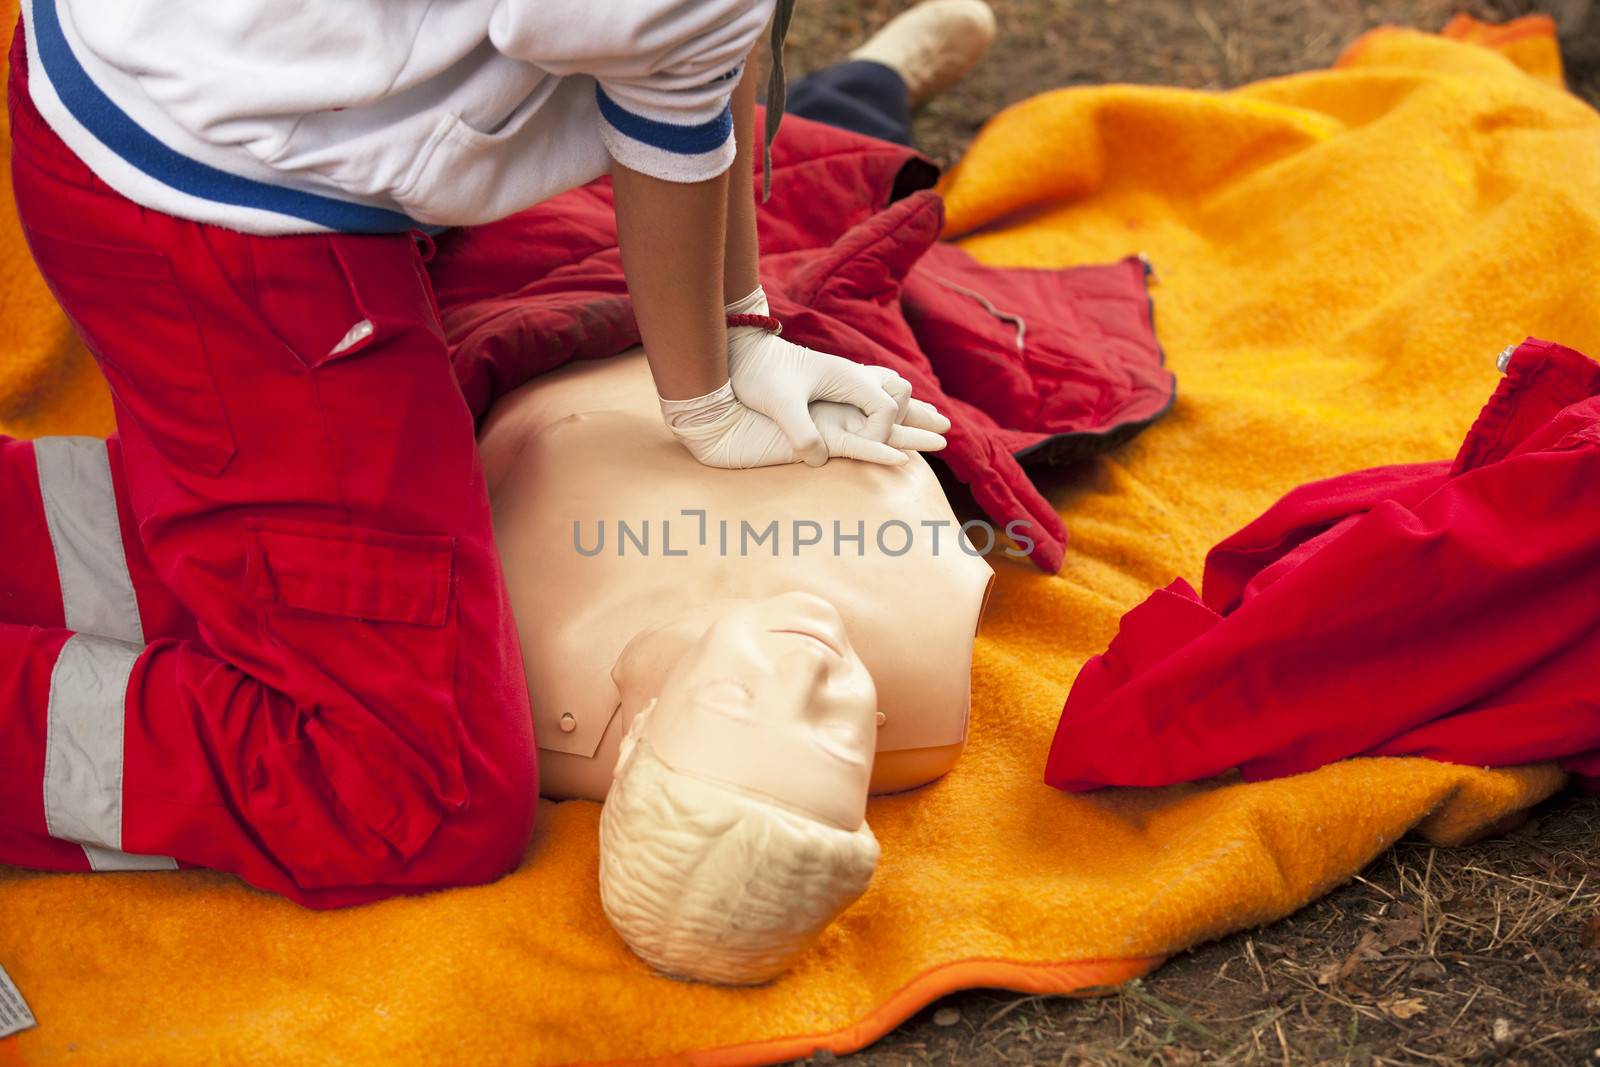 First aid training by wellphoto